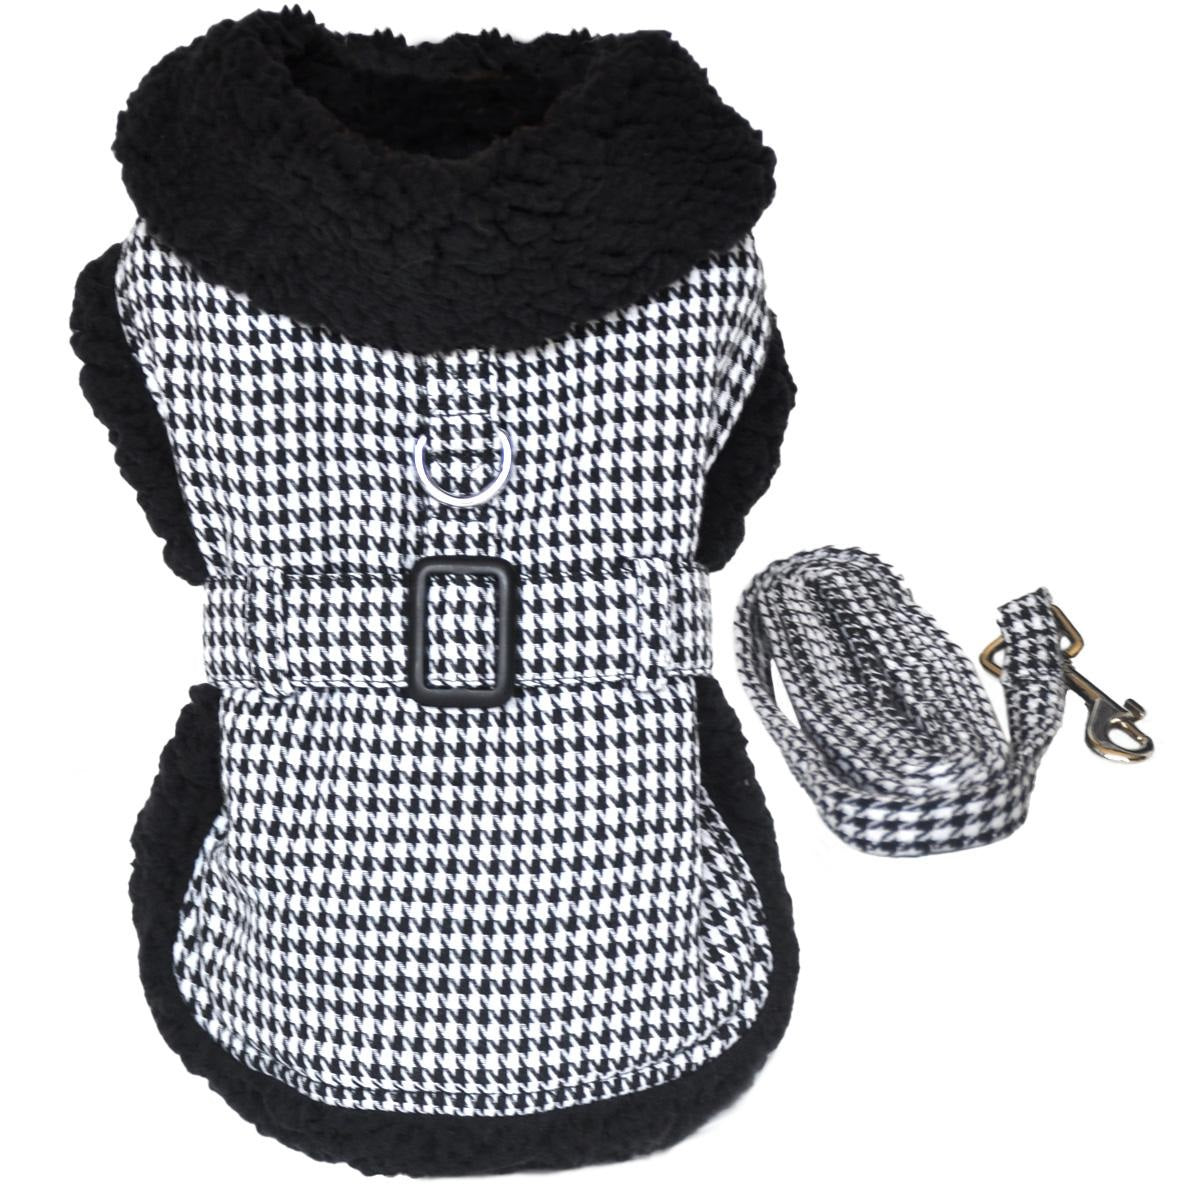 Sherpa Line Dog Harness Coat - Black and White Houndstooth with Matching Leash